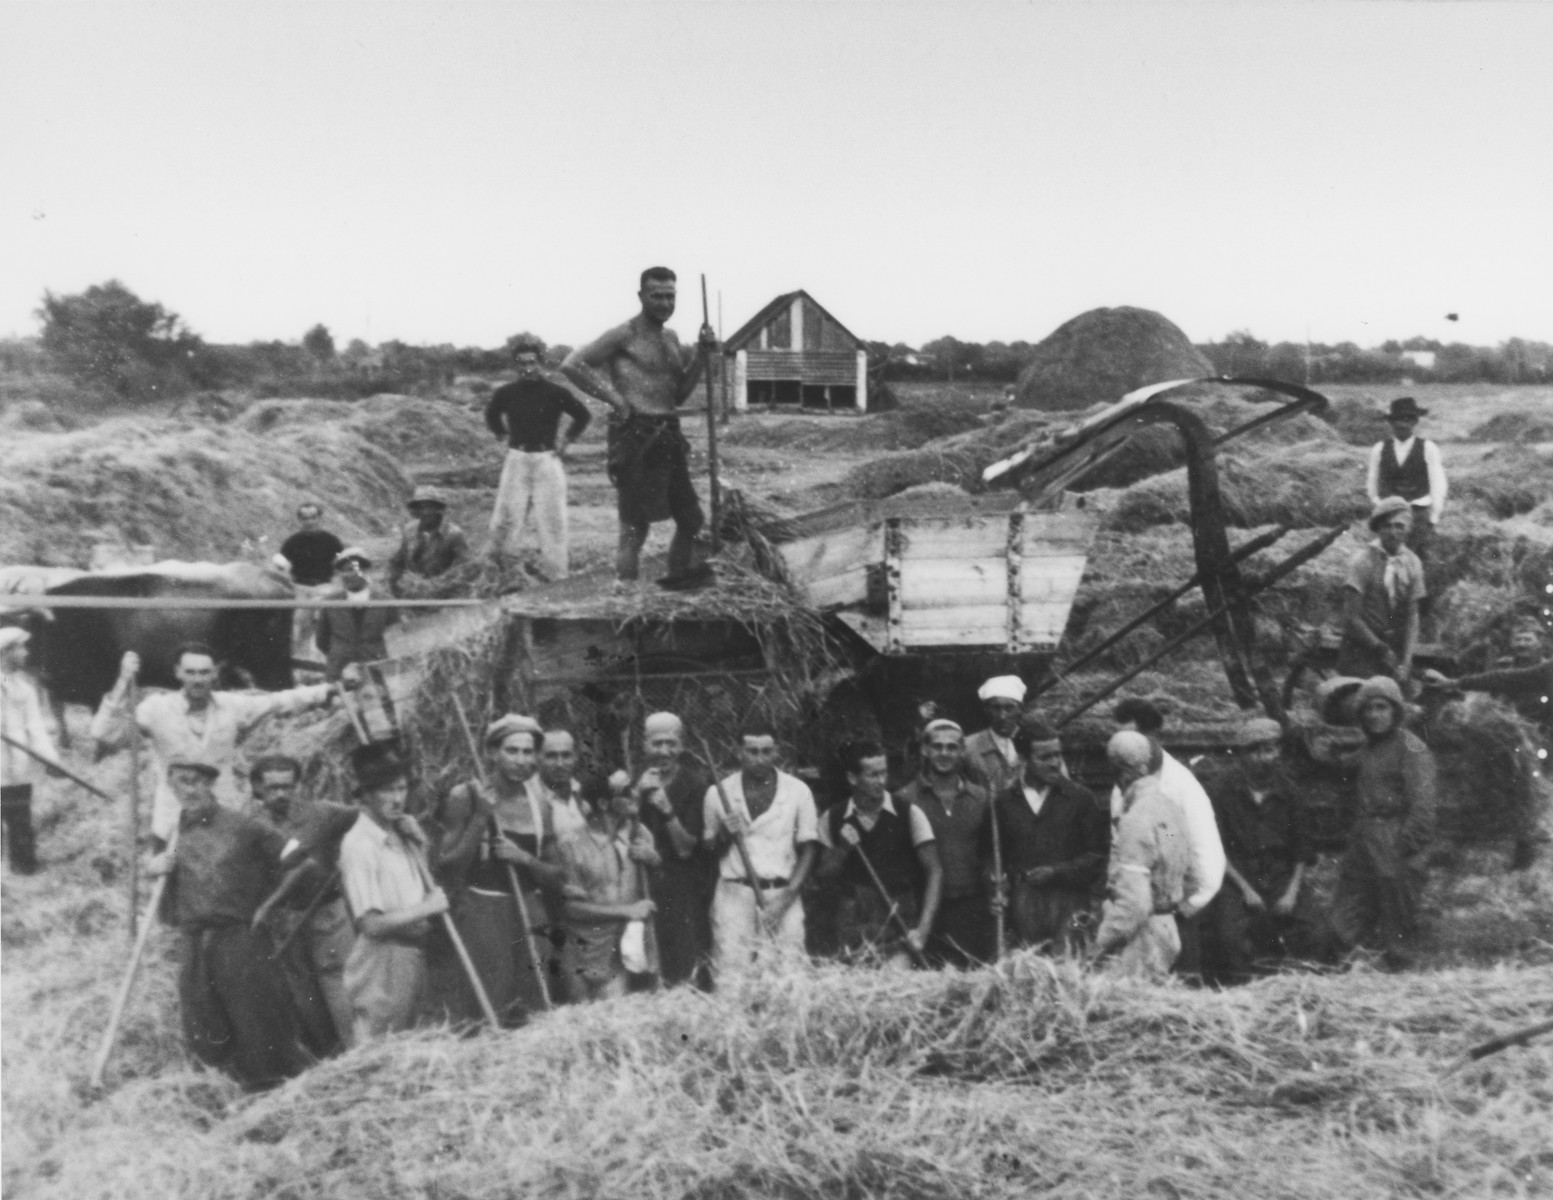 Group portrait of Jewish prisoners mowing hay in the Sabac concentration camp.

Among those pictured is Walter Fink.